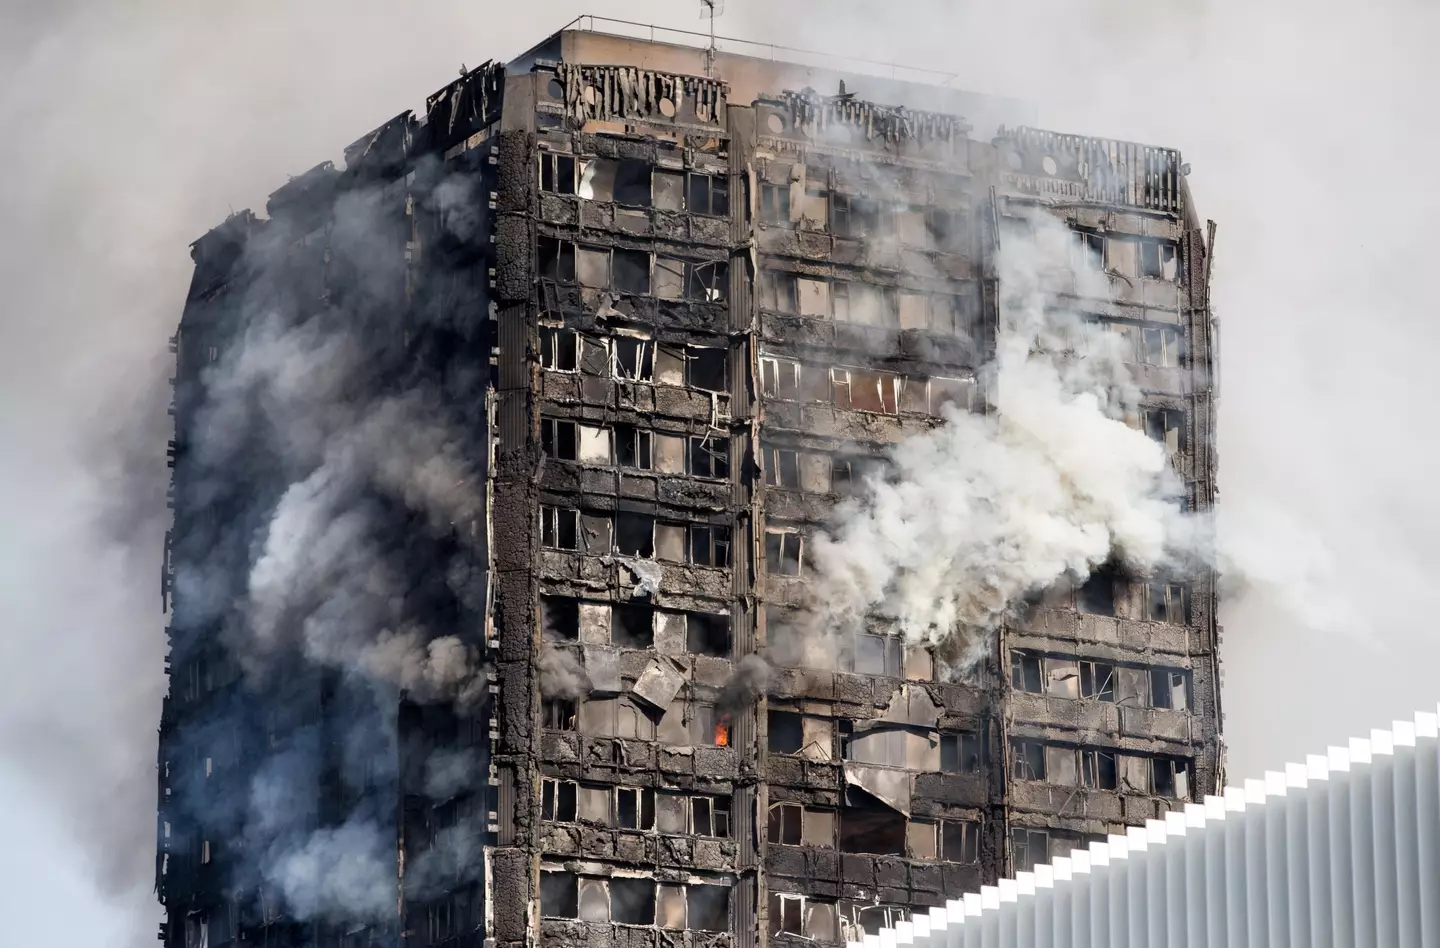 The Grenfell fire took the lives of 72 people. (Alamy)